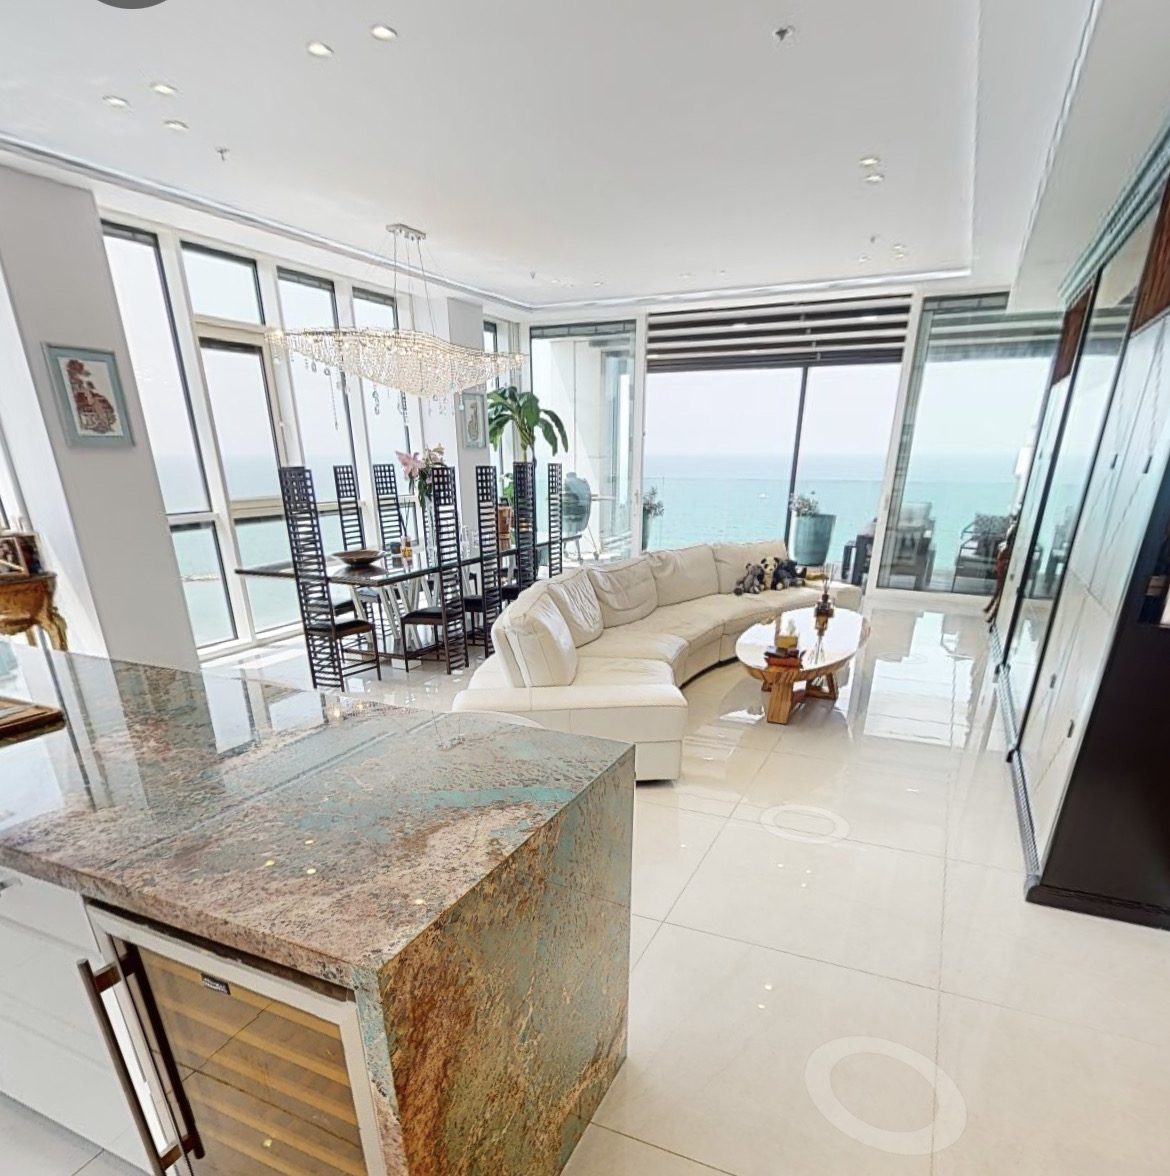 A large living room with a view of the ocean.